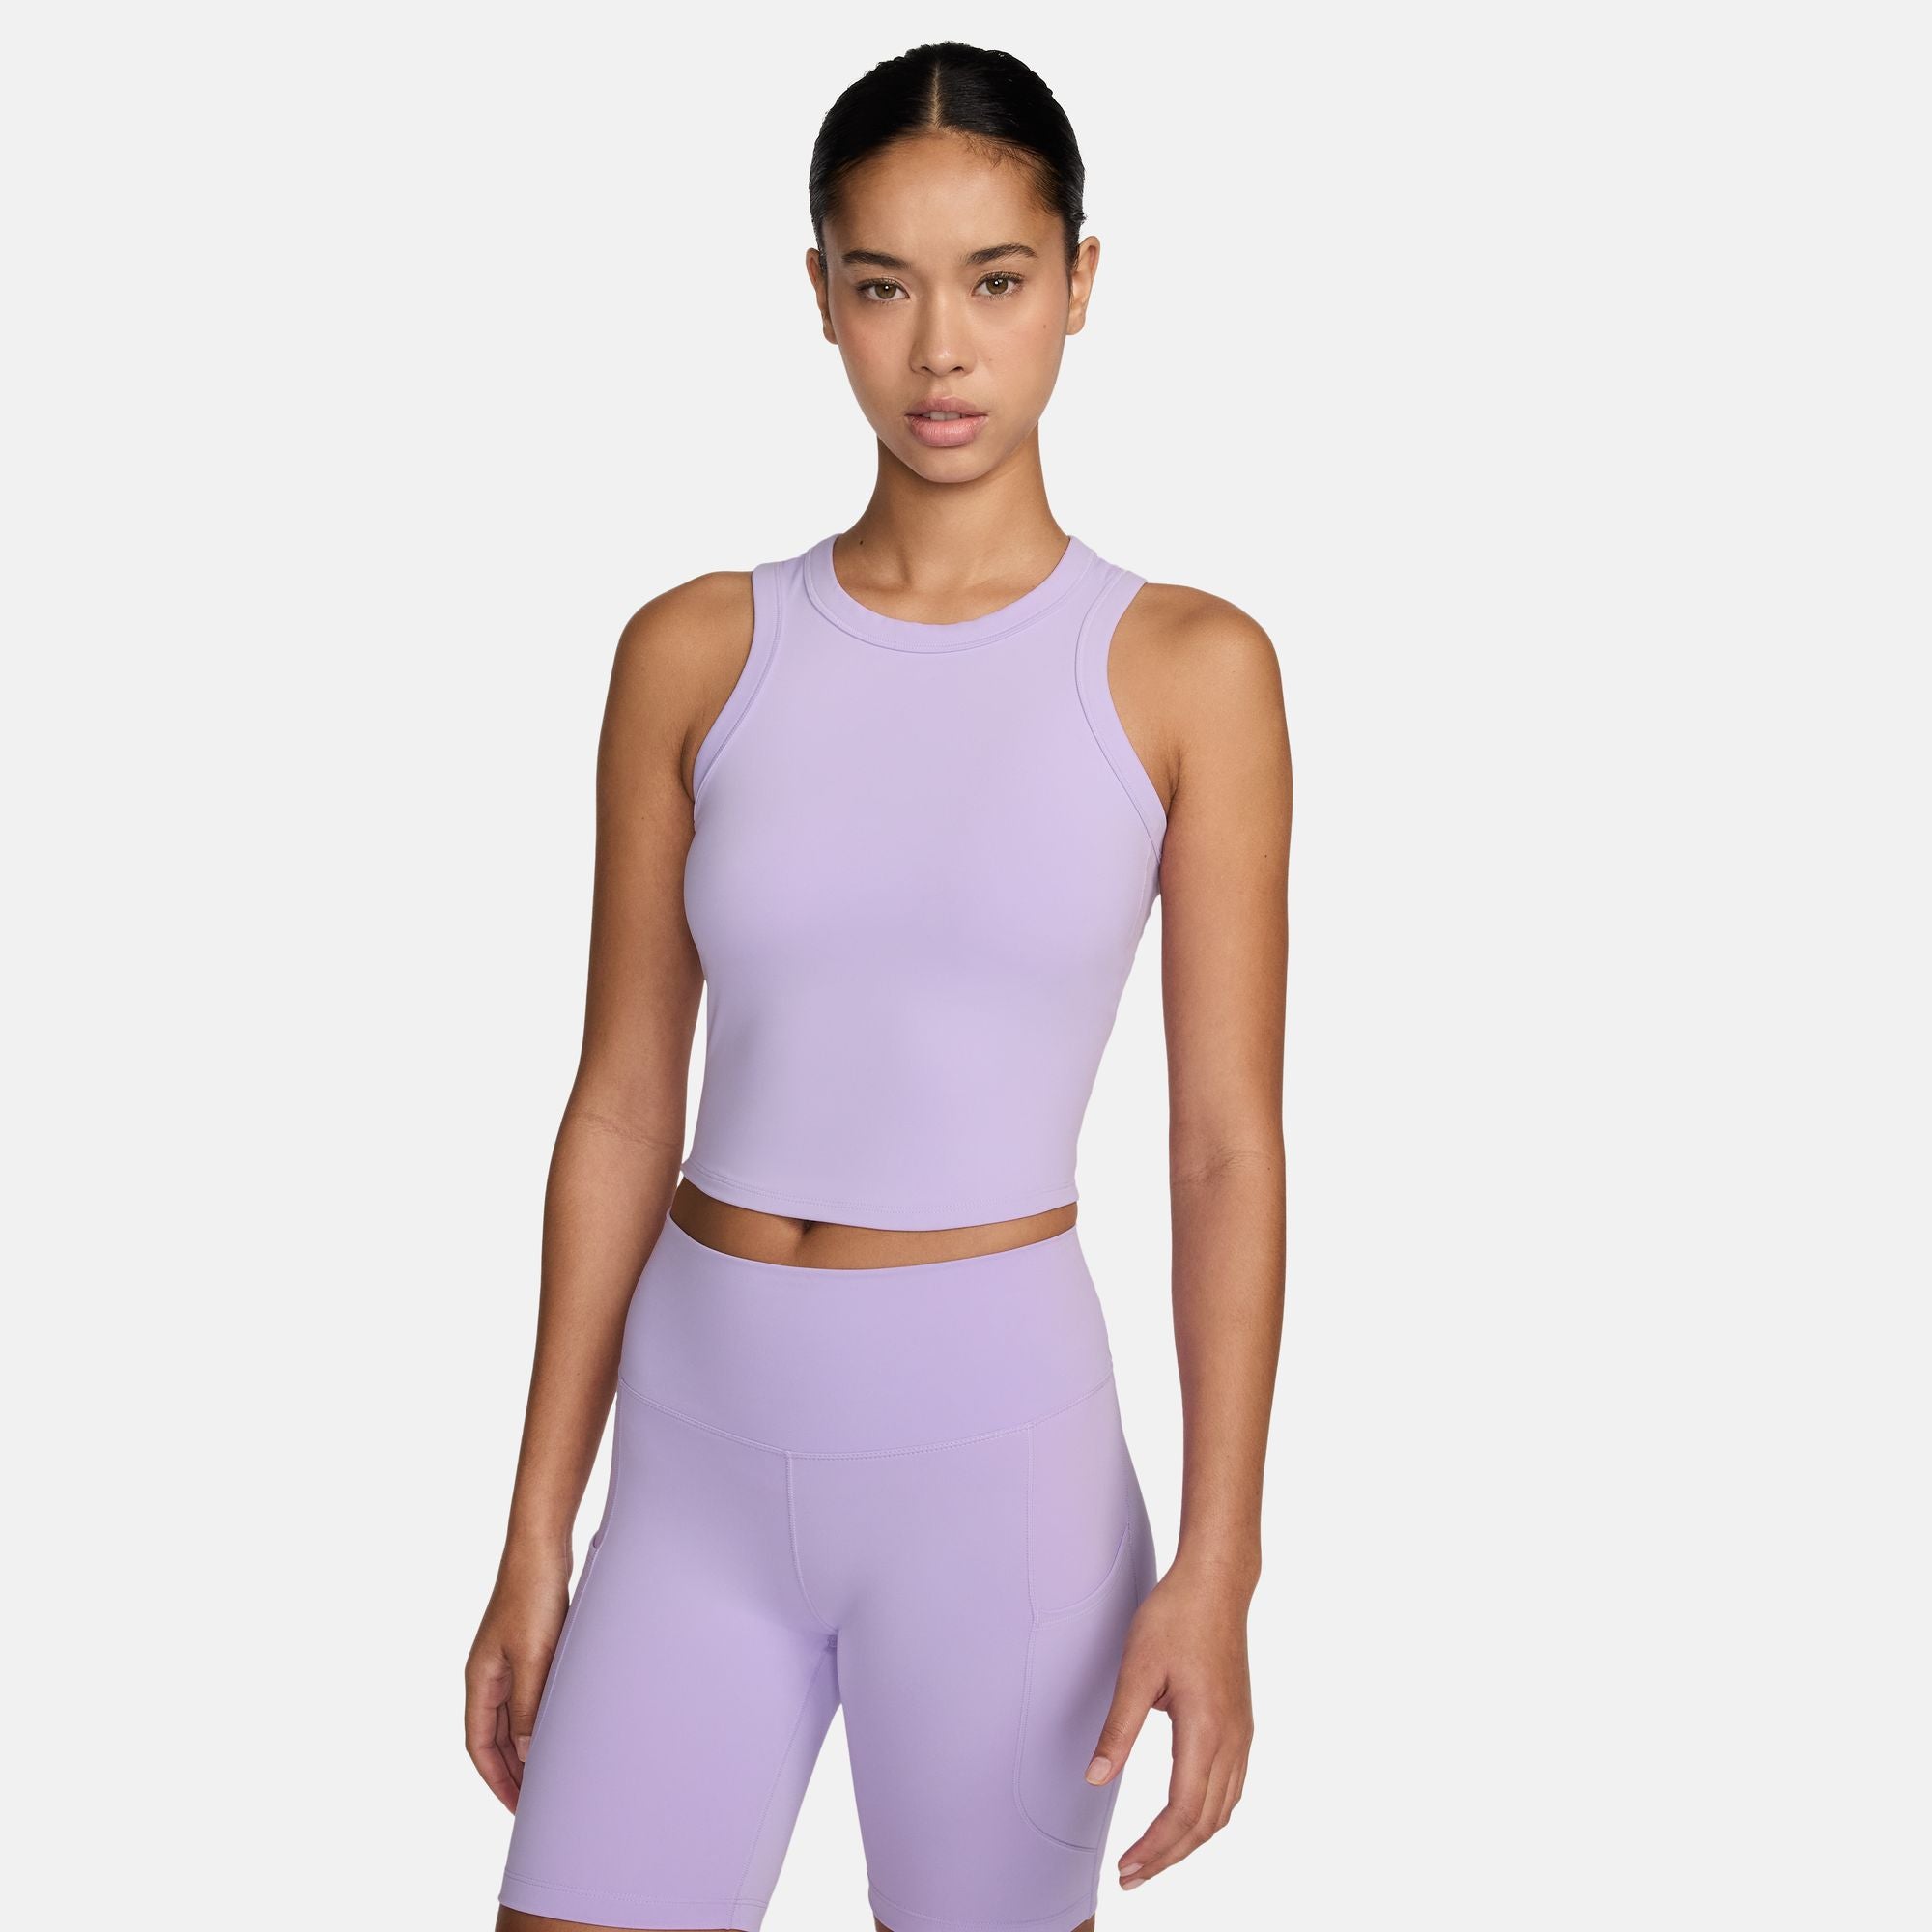 NIKE WOMEN'S ONE FITTED TANK - 512 LILAC BLOOM/BLACK L